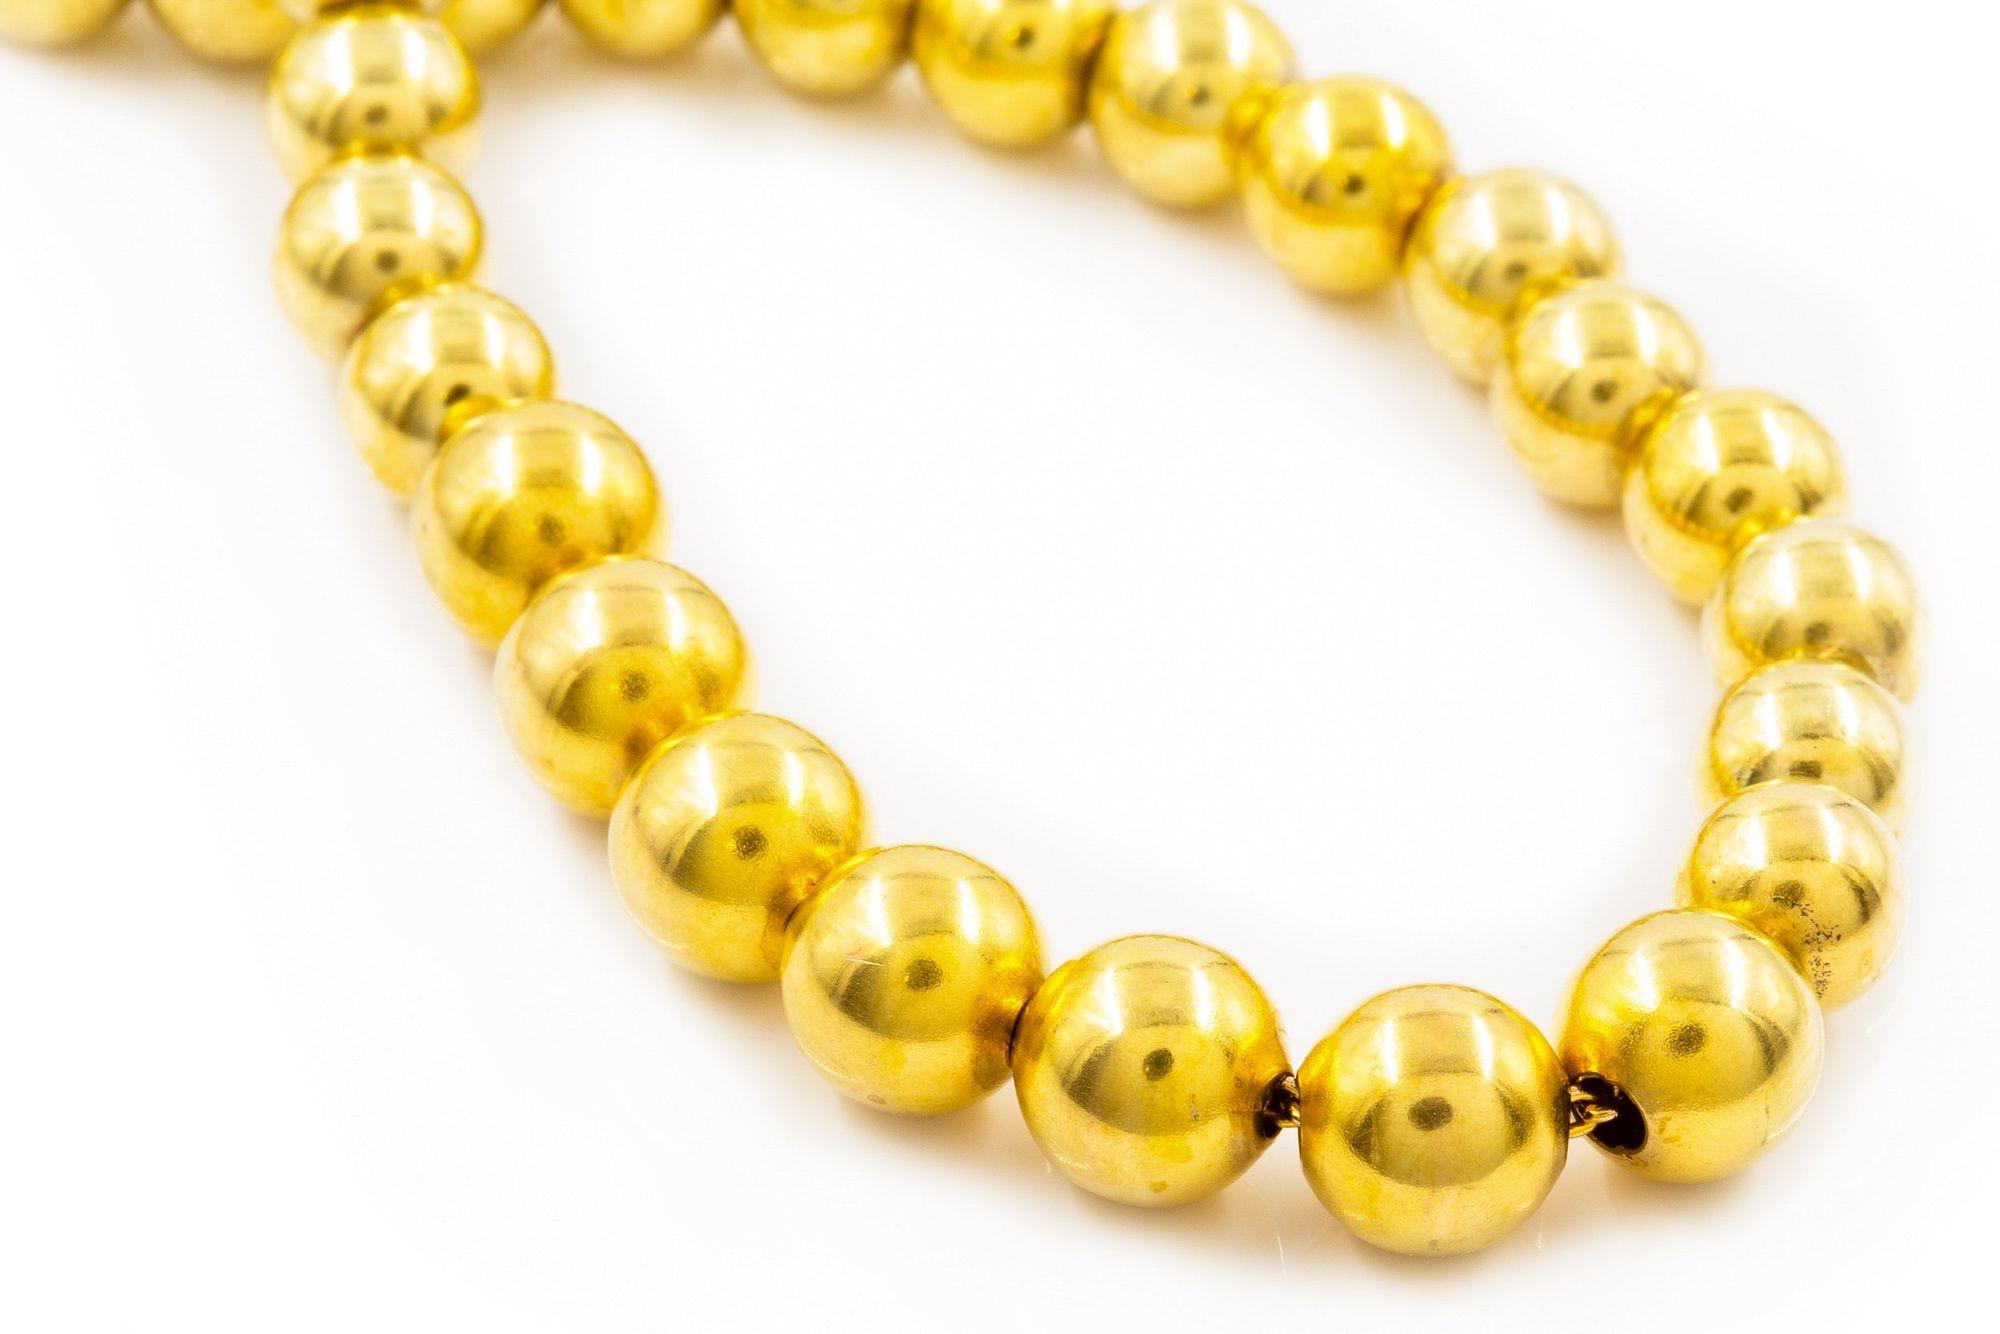 vintage gold bead necklace